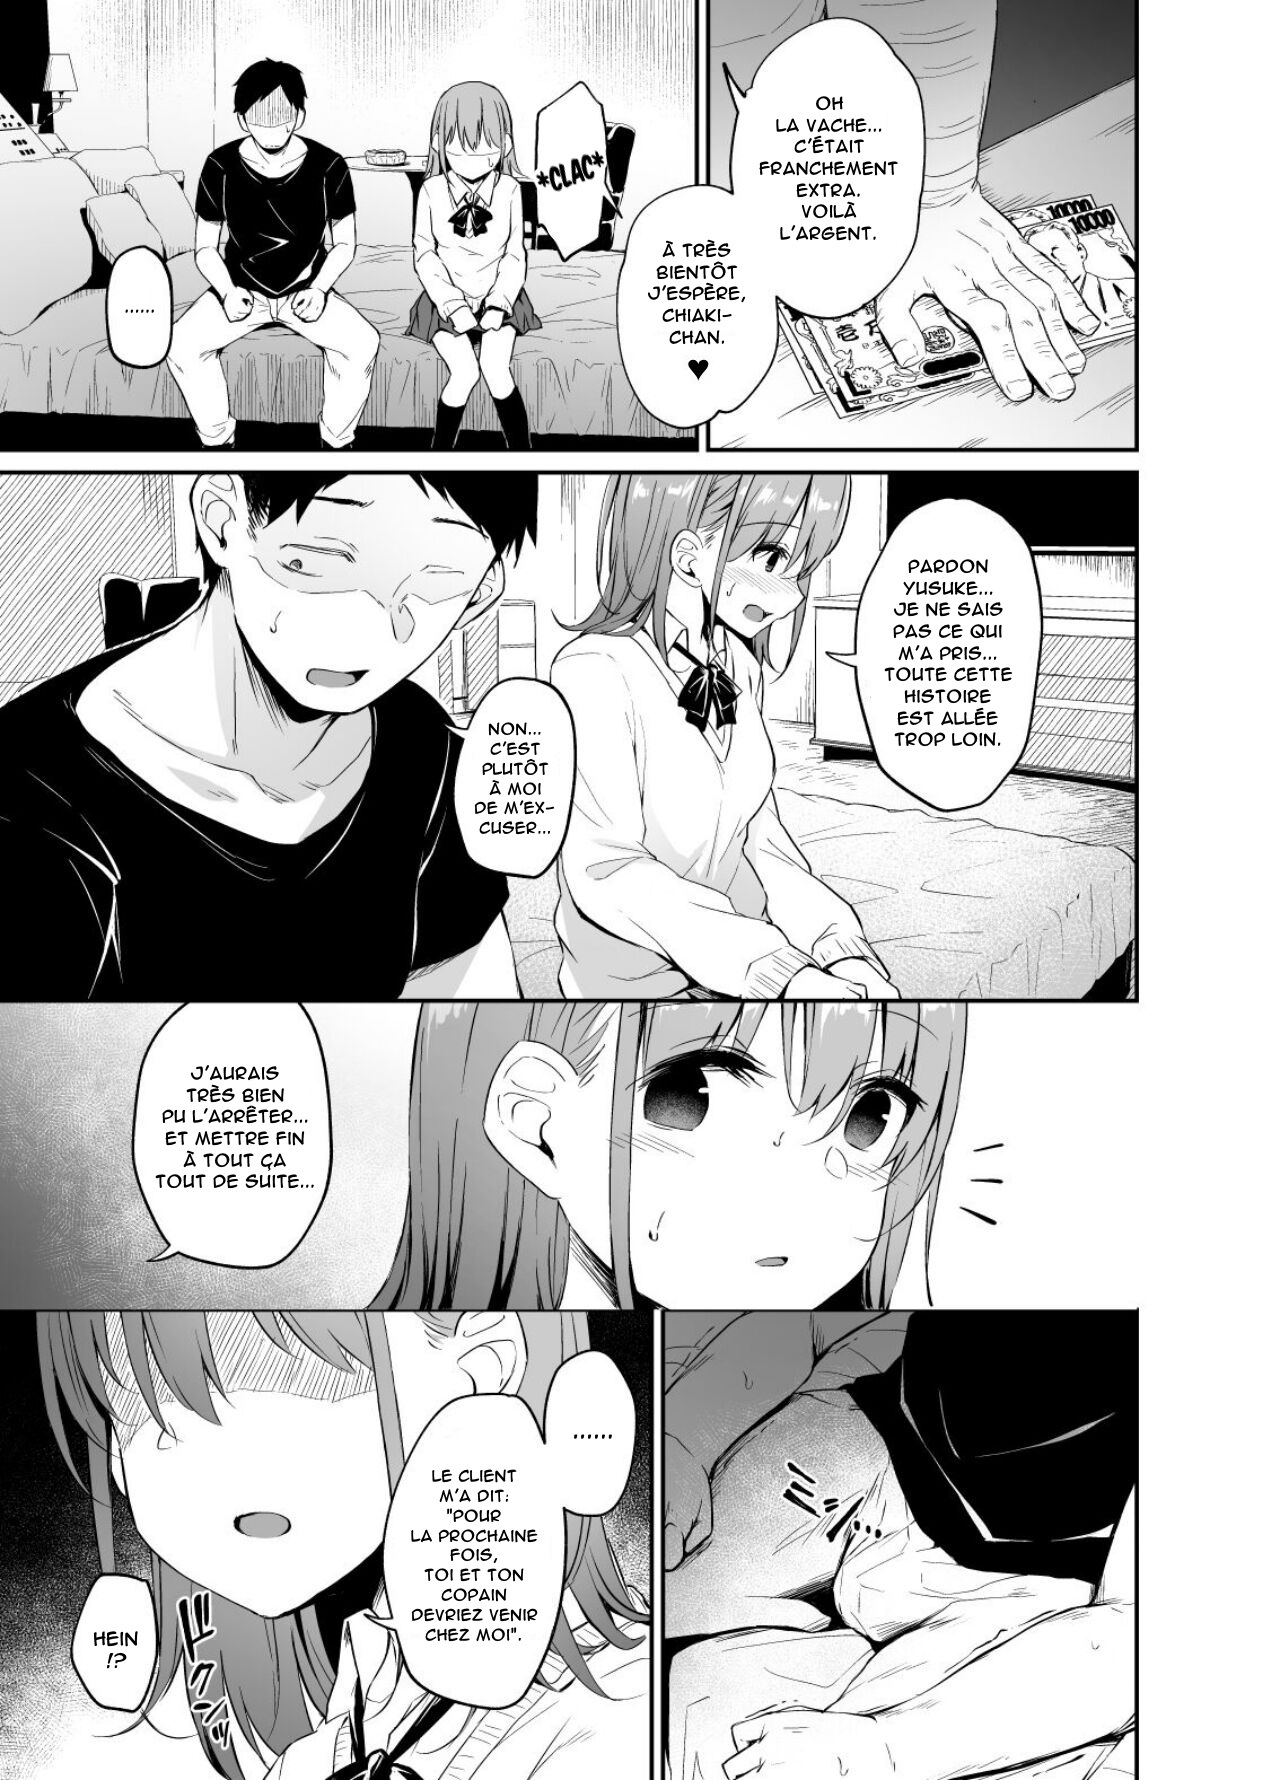 Enkou Kanojo to Kengakukai  Paid dates with my girlfriend prostitute side-by-side experience numero d'image 29